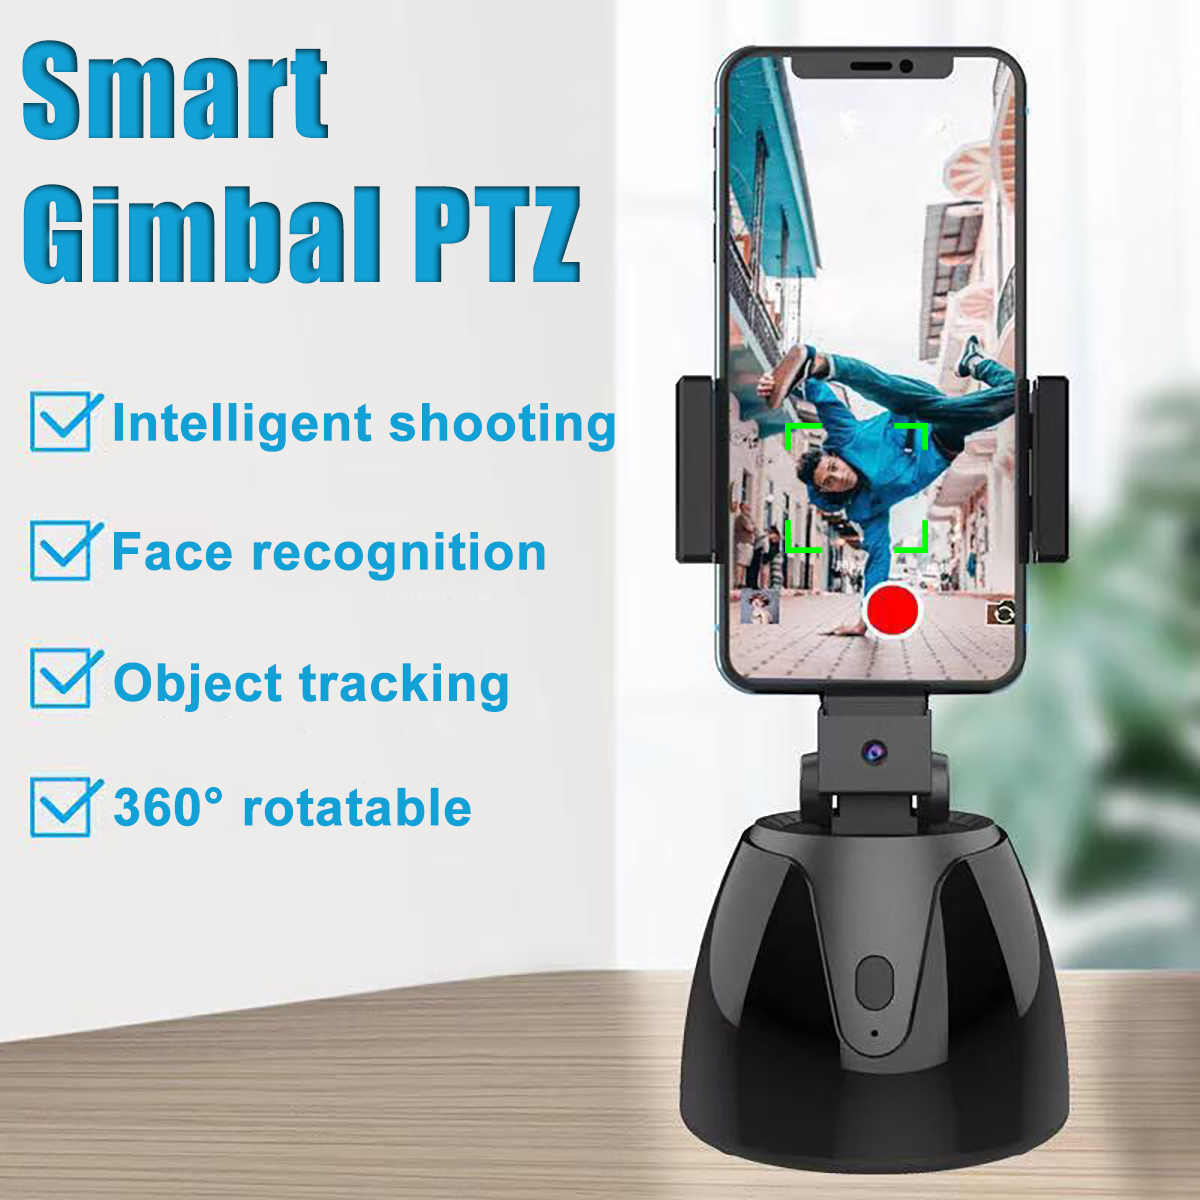 bluetooth-Smart-Gimbal-PTZ-Face-Recognition-ObjectTracking-360deg-Rotatable-Video-1932077-1